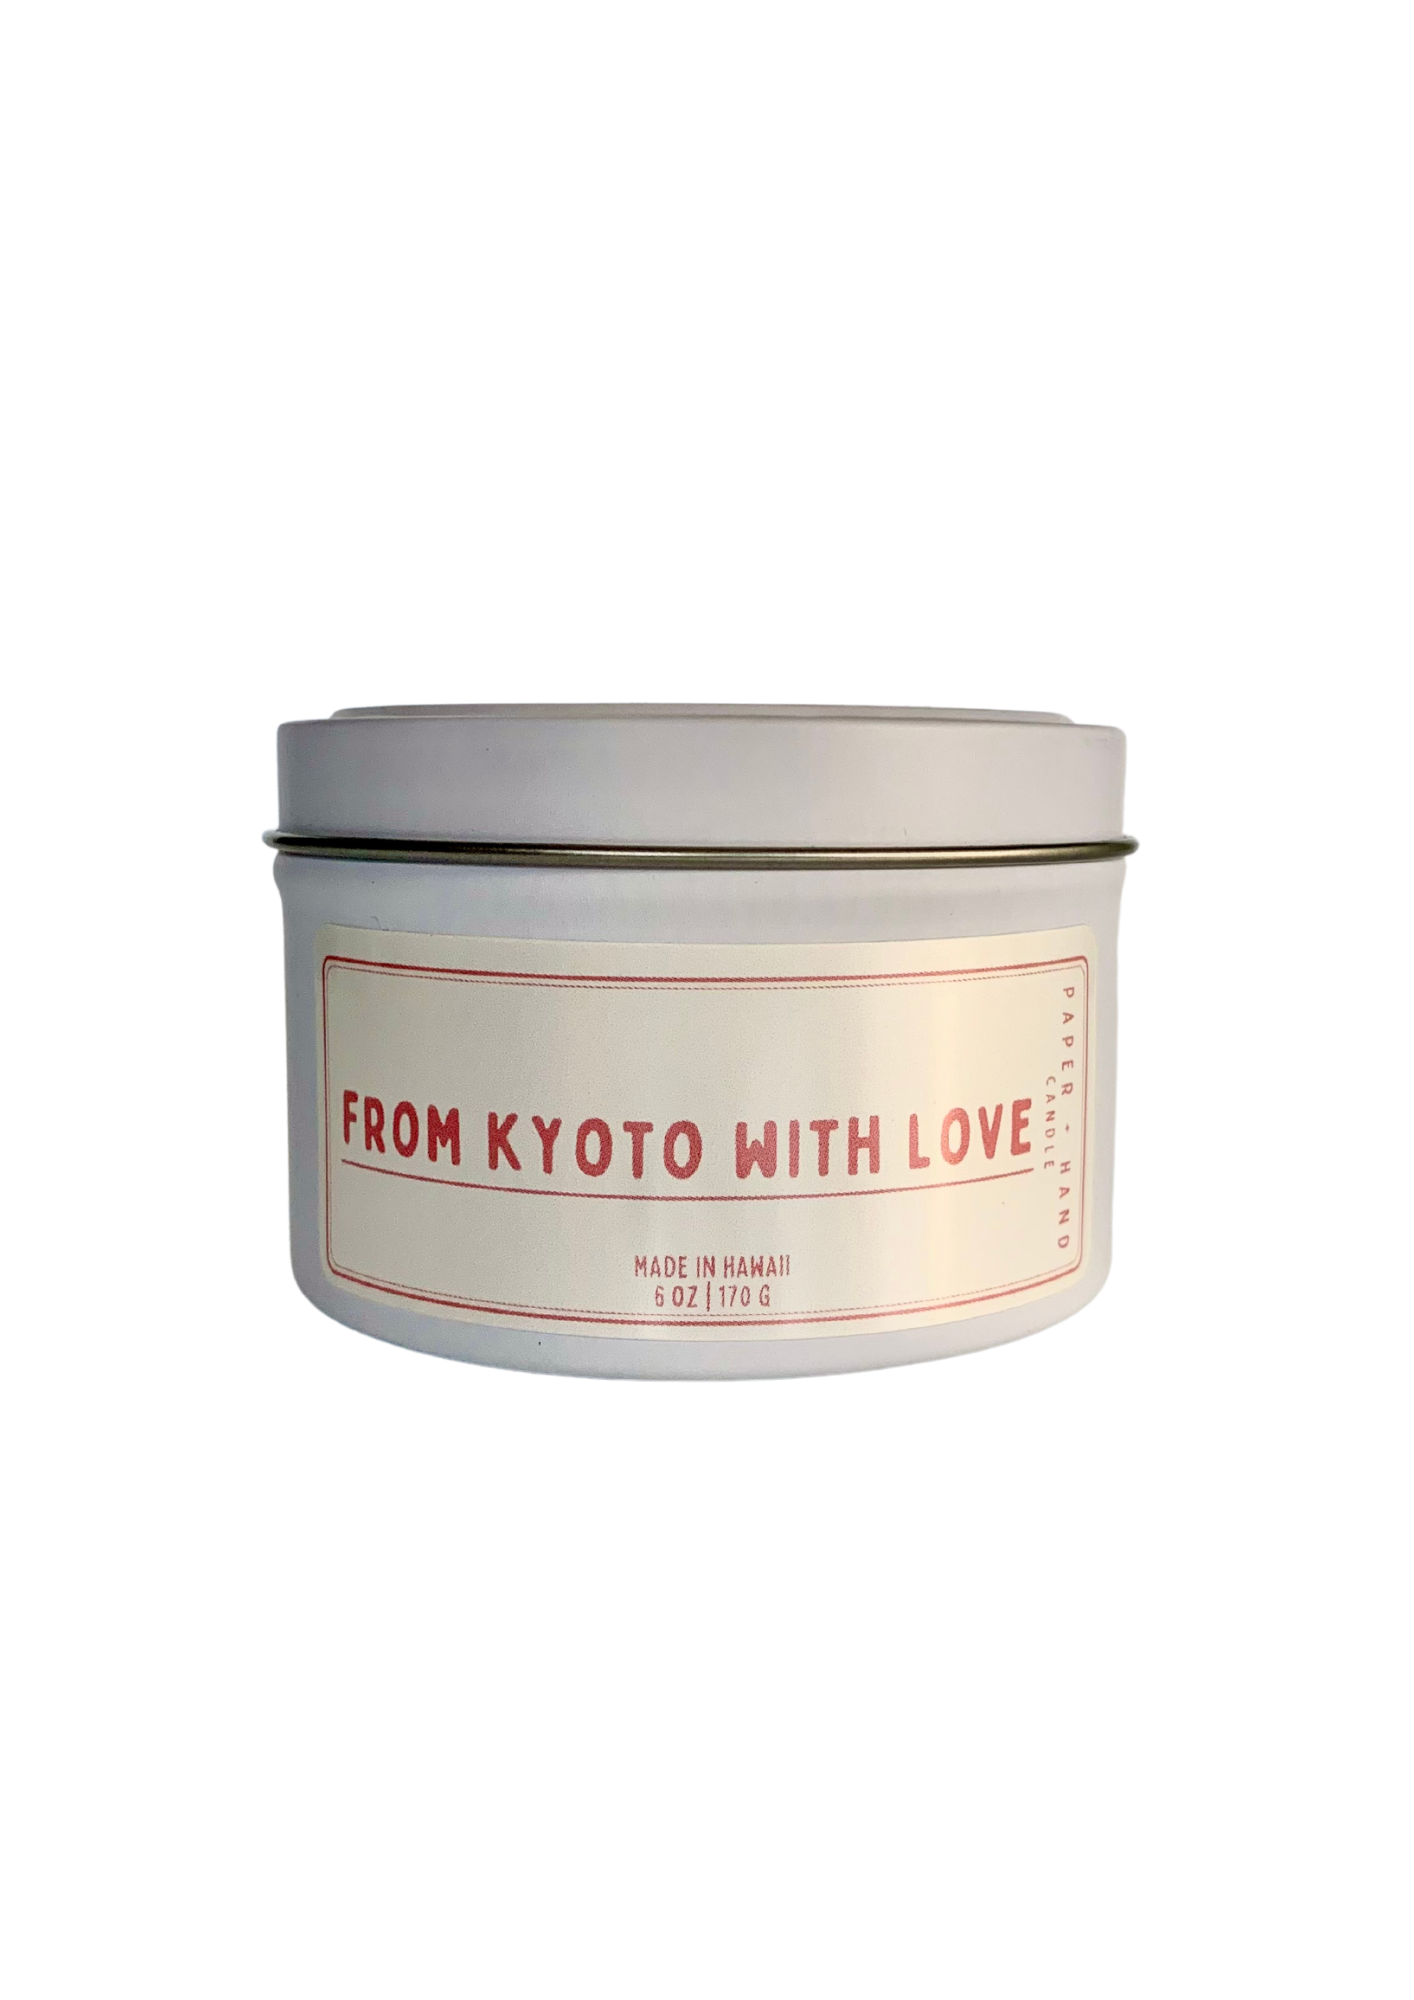 6 oz tin - Scented Soy Wax Candle